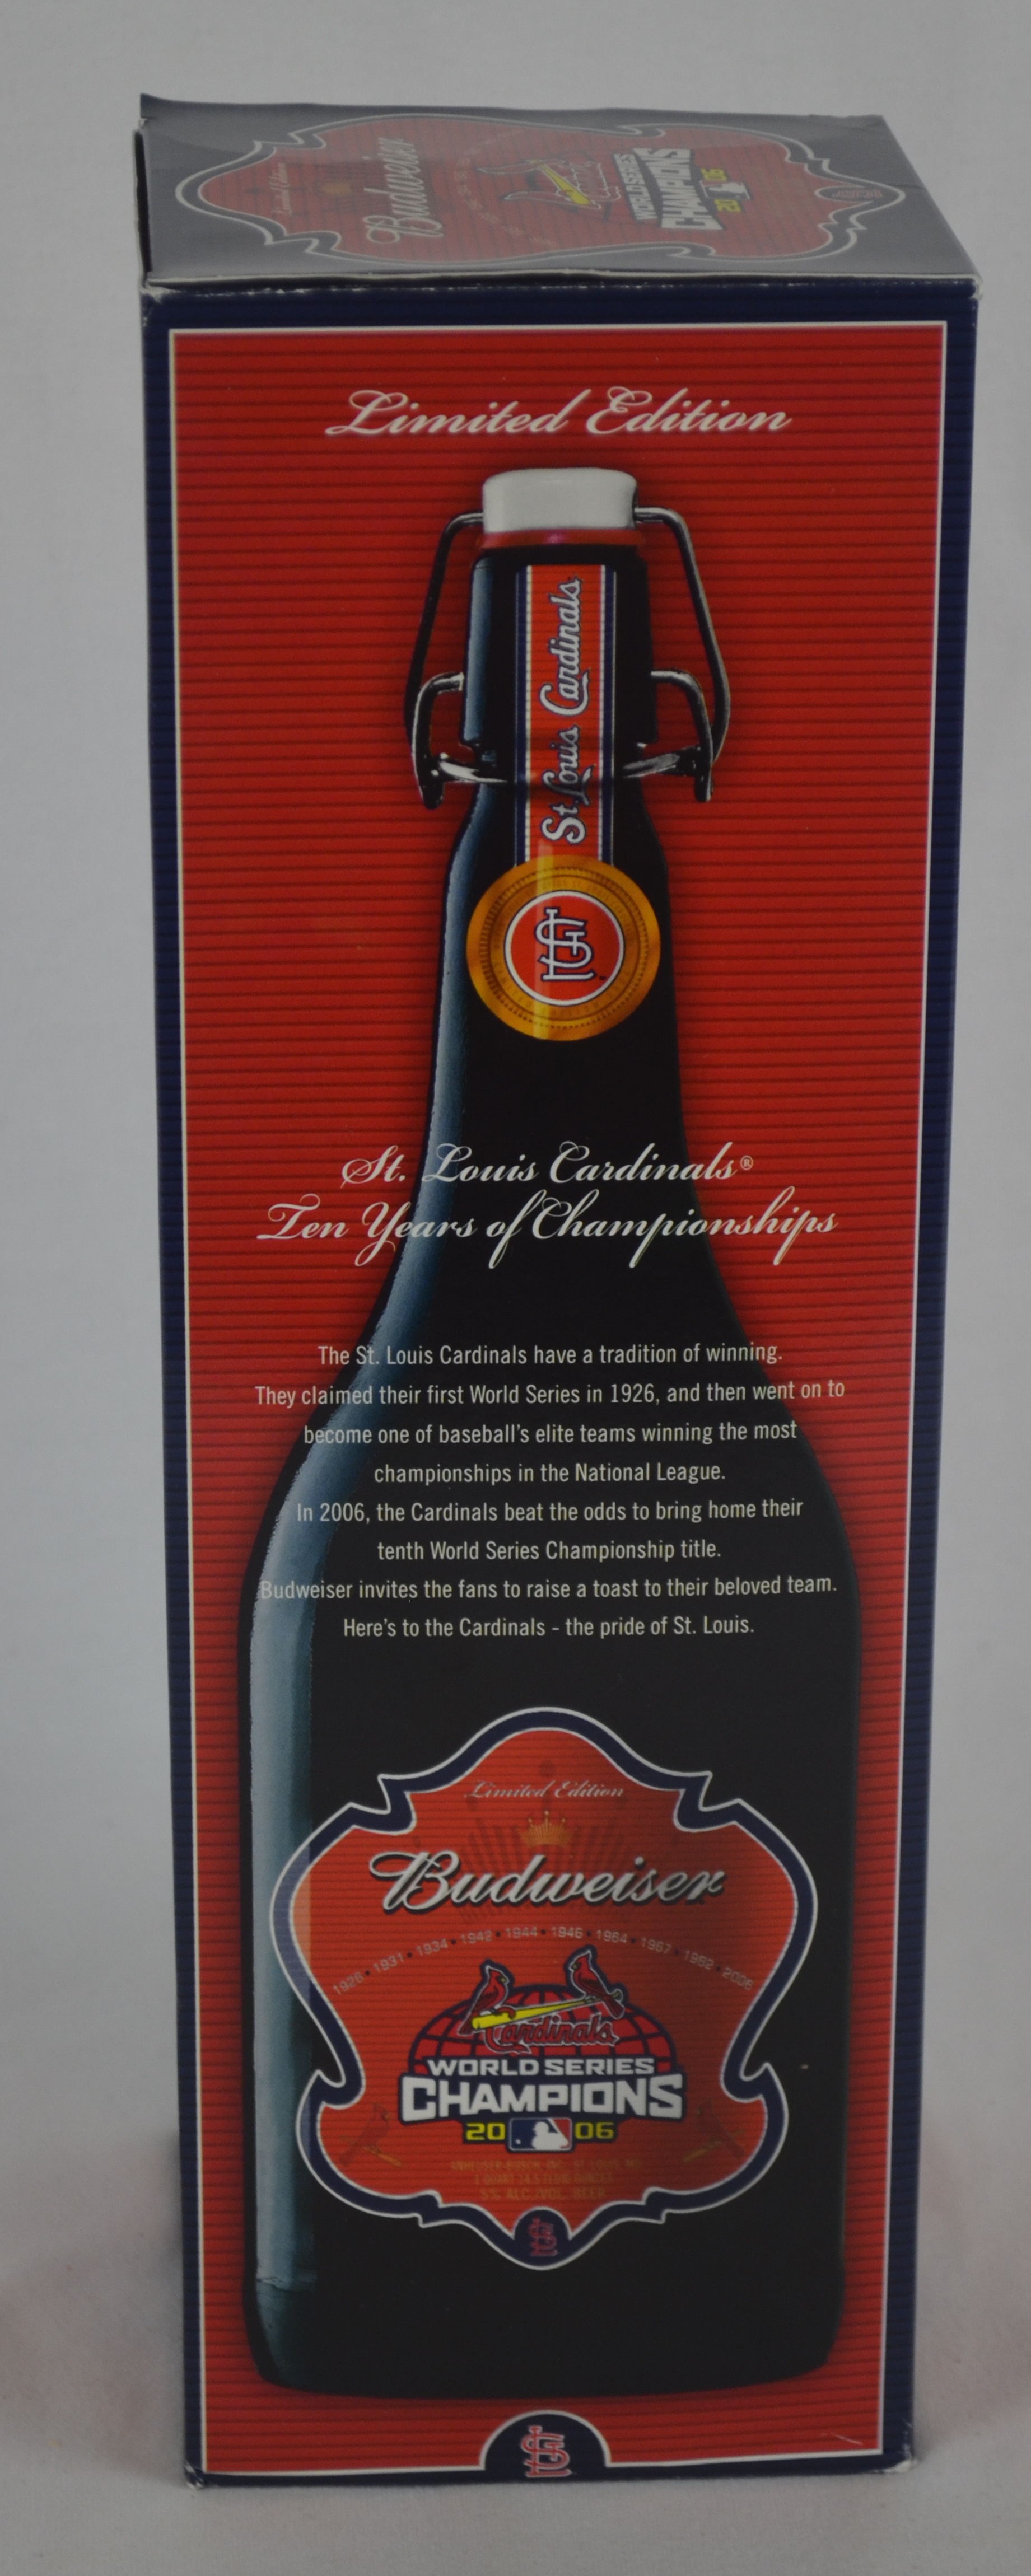 1967 St. Louis Cardinals World Series Championship Trophy. As much, Lot  #19566